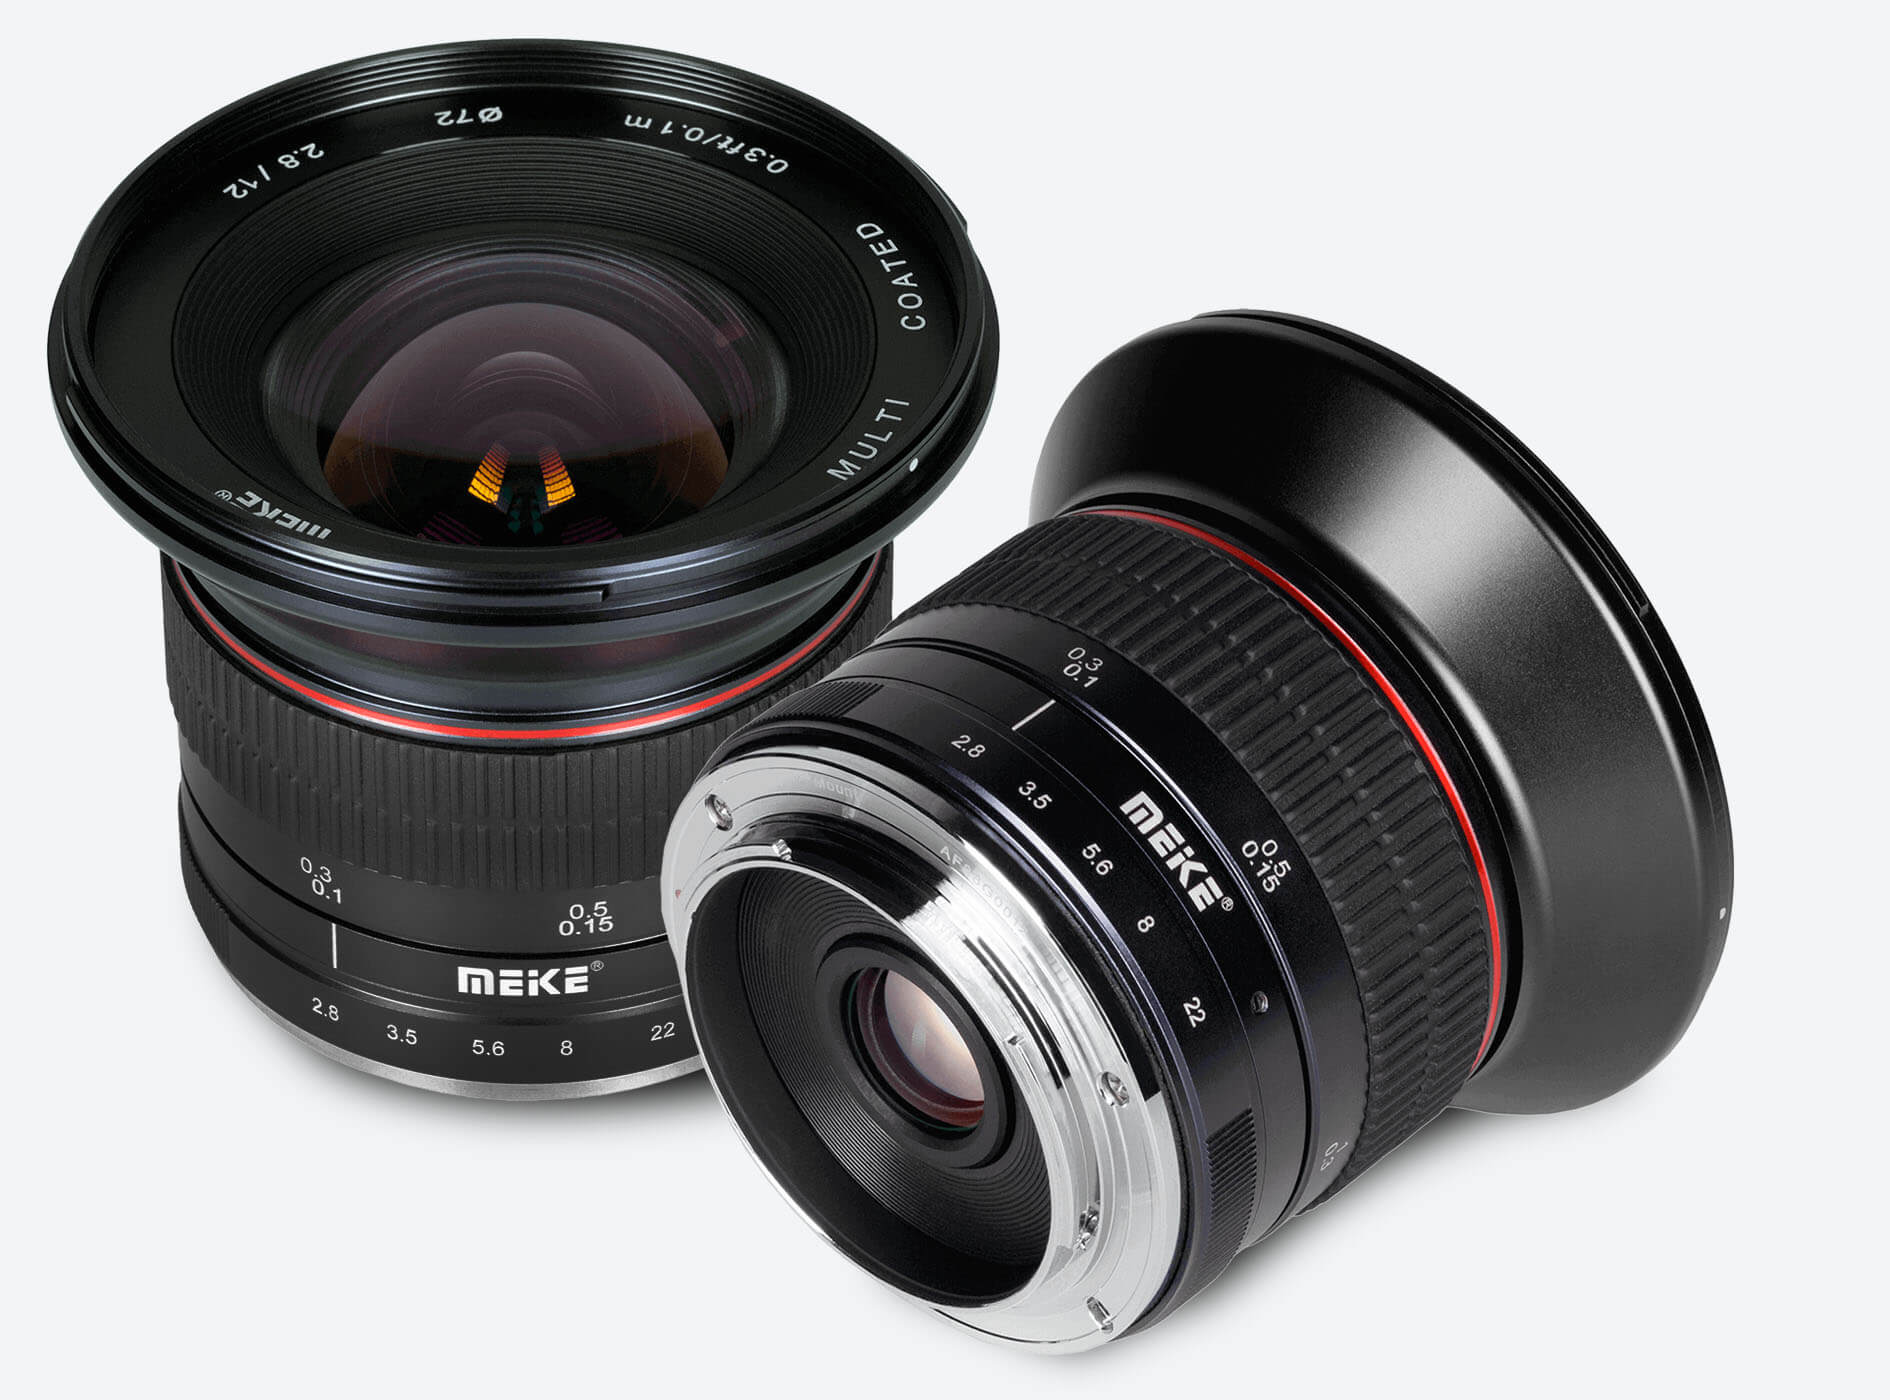 Meike photographic lenses and accessories